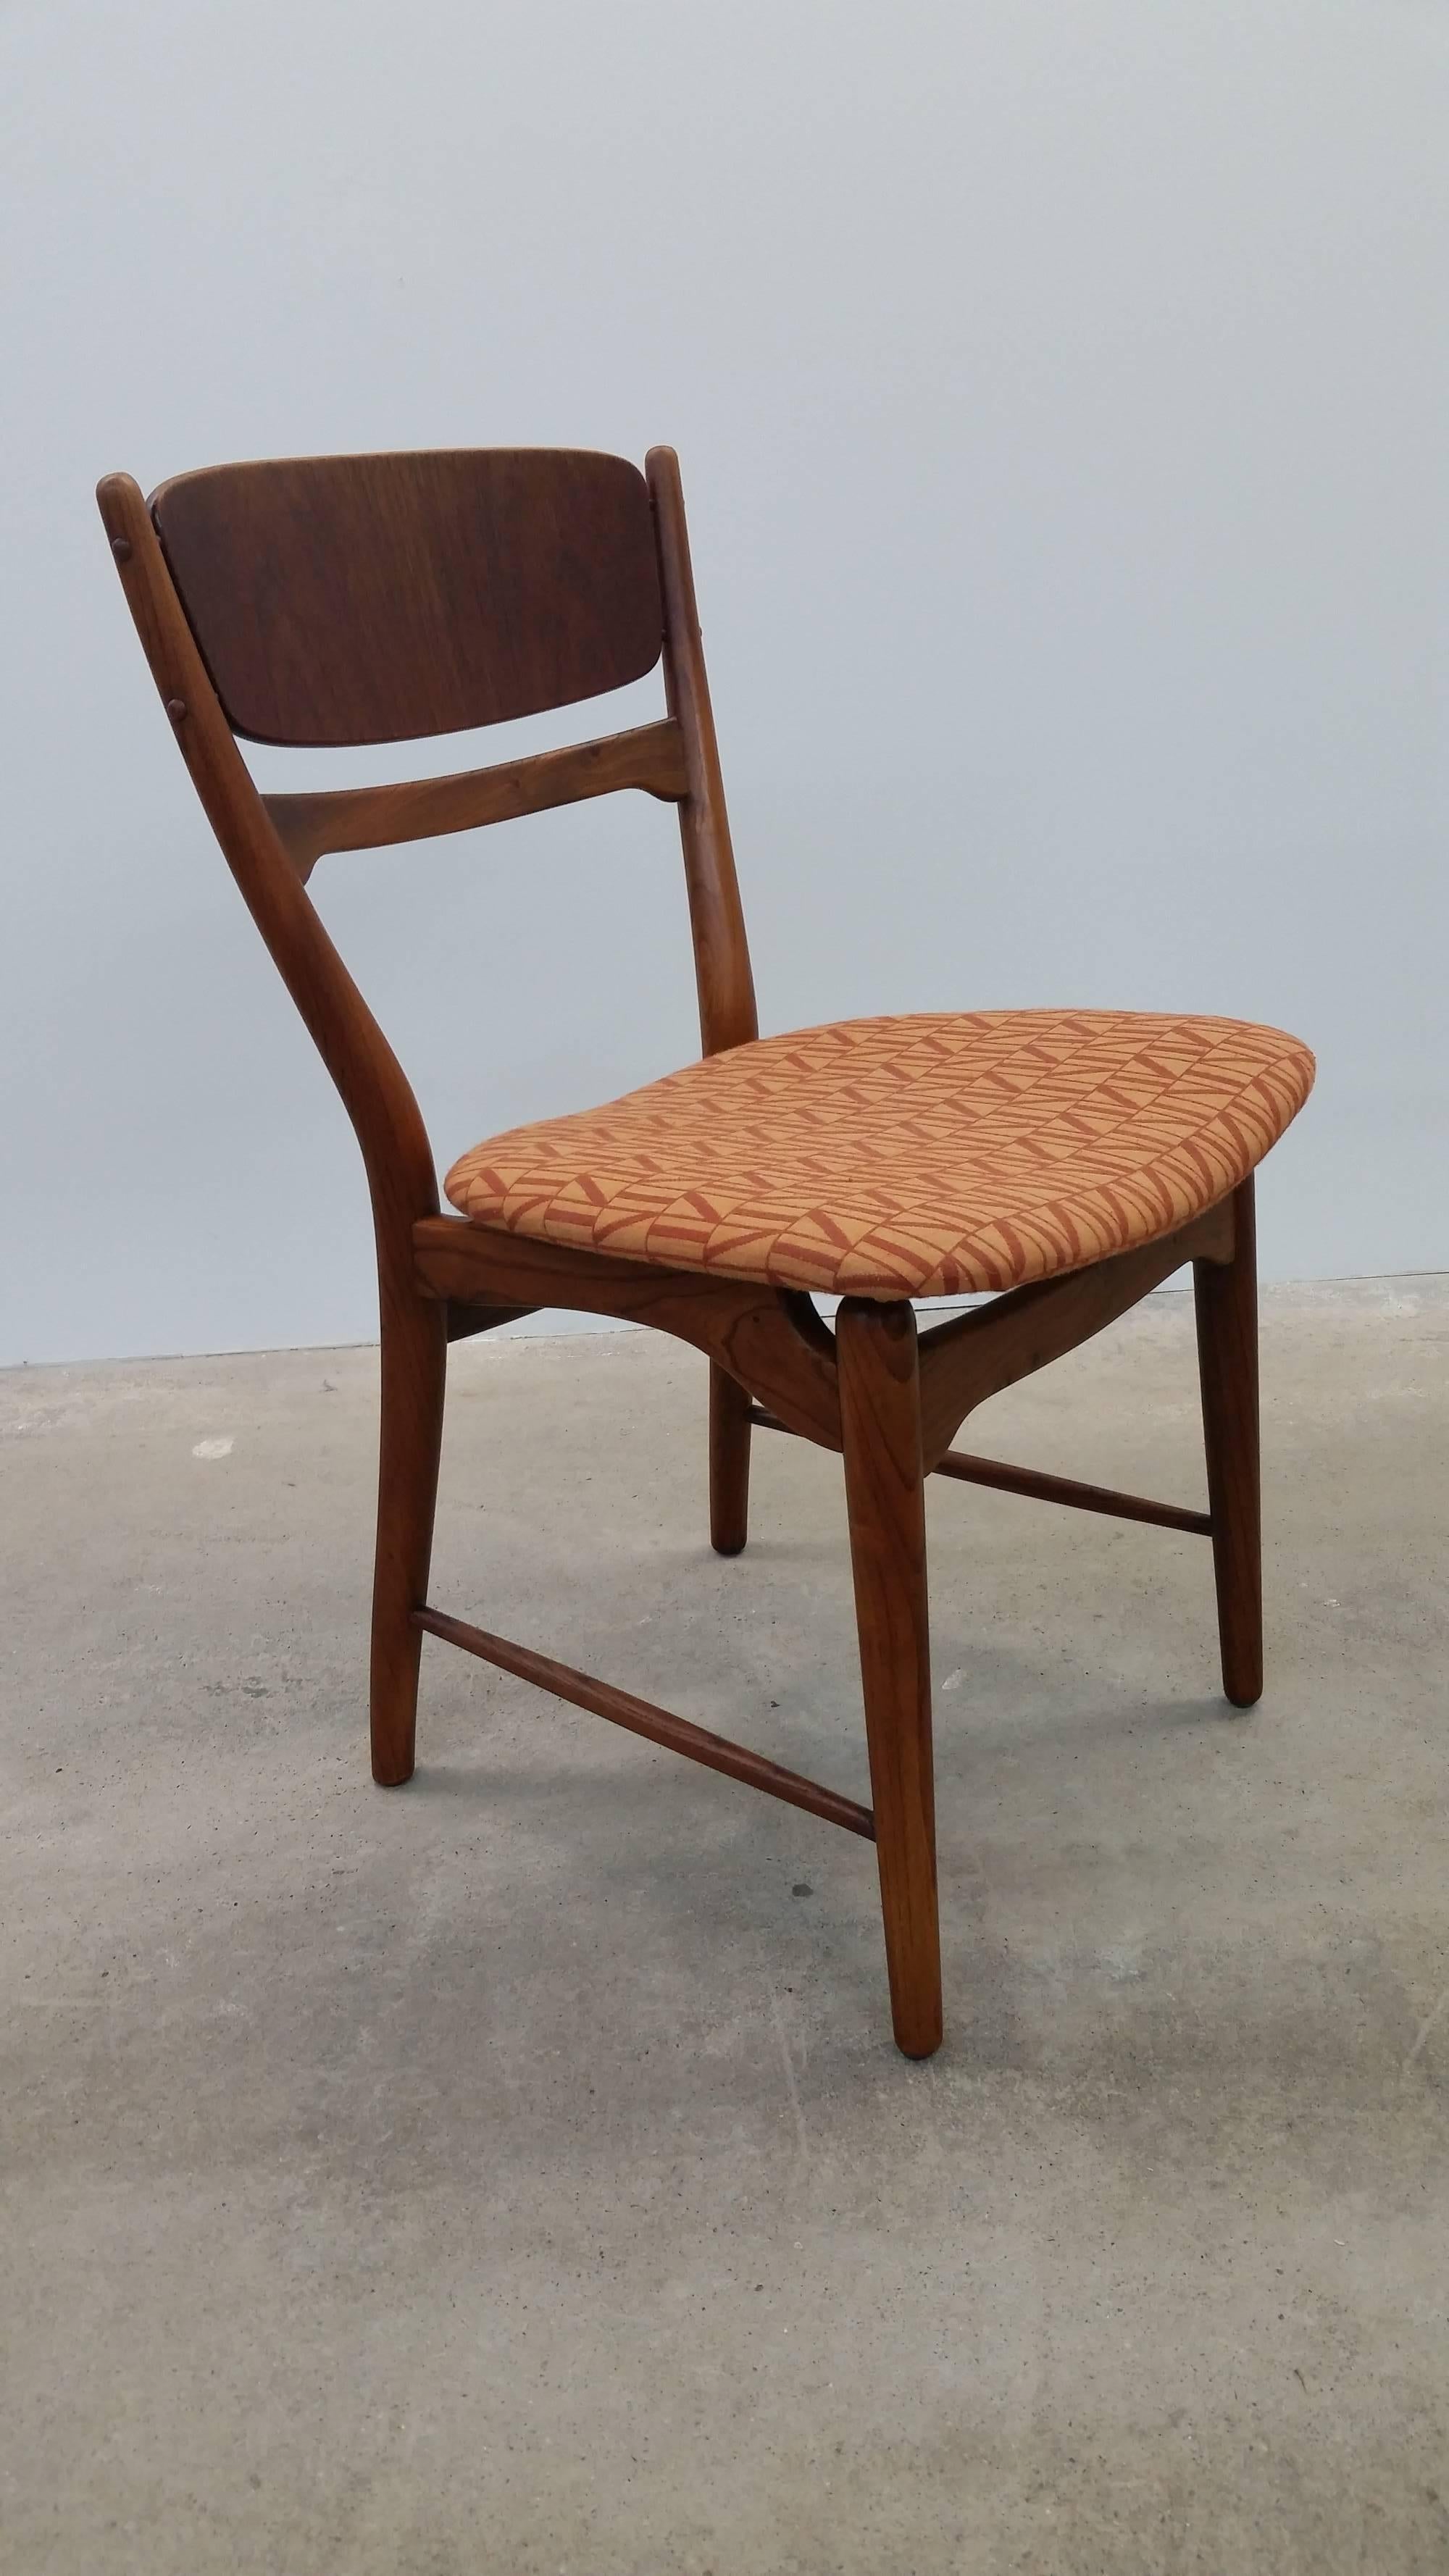 Danish Set of Four Dining Chairs in Walnut and Teak, by Arne Wahl Iversen For Sale